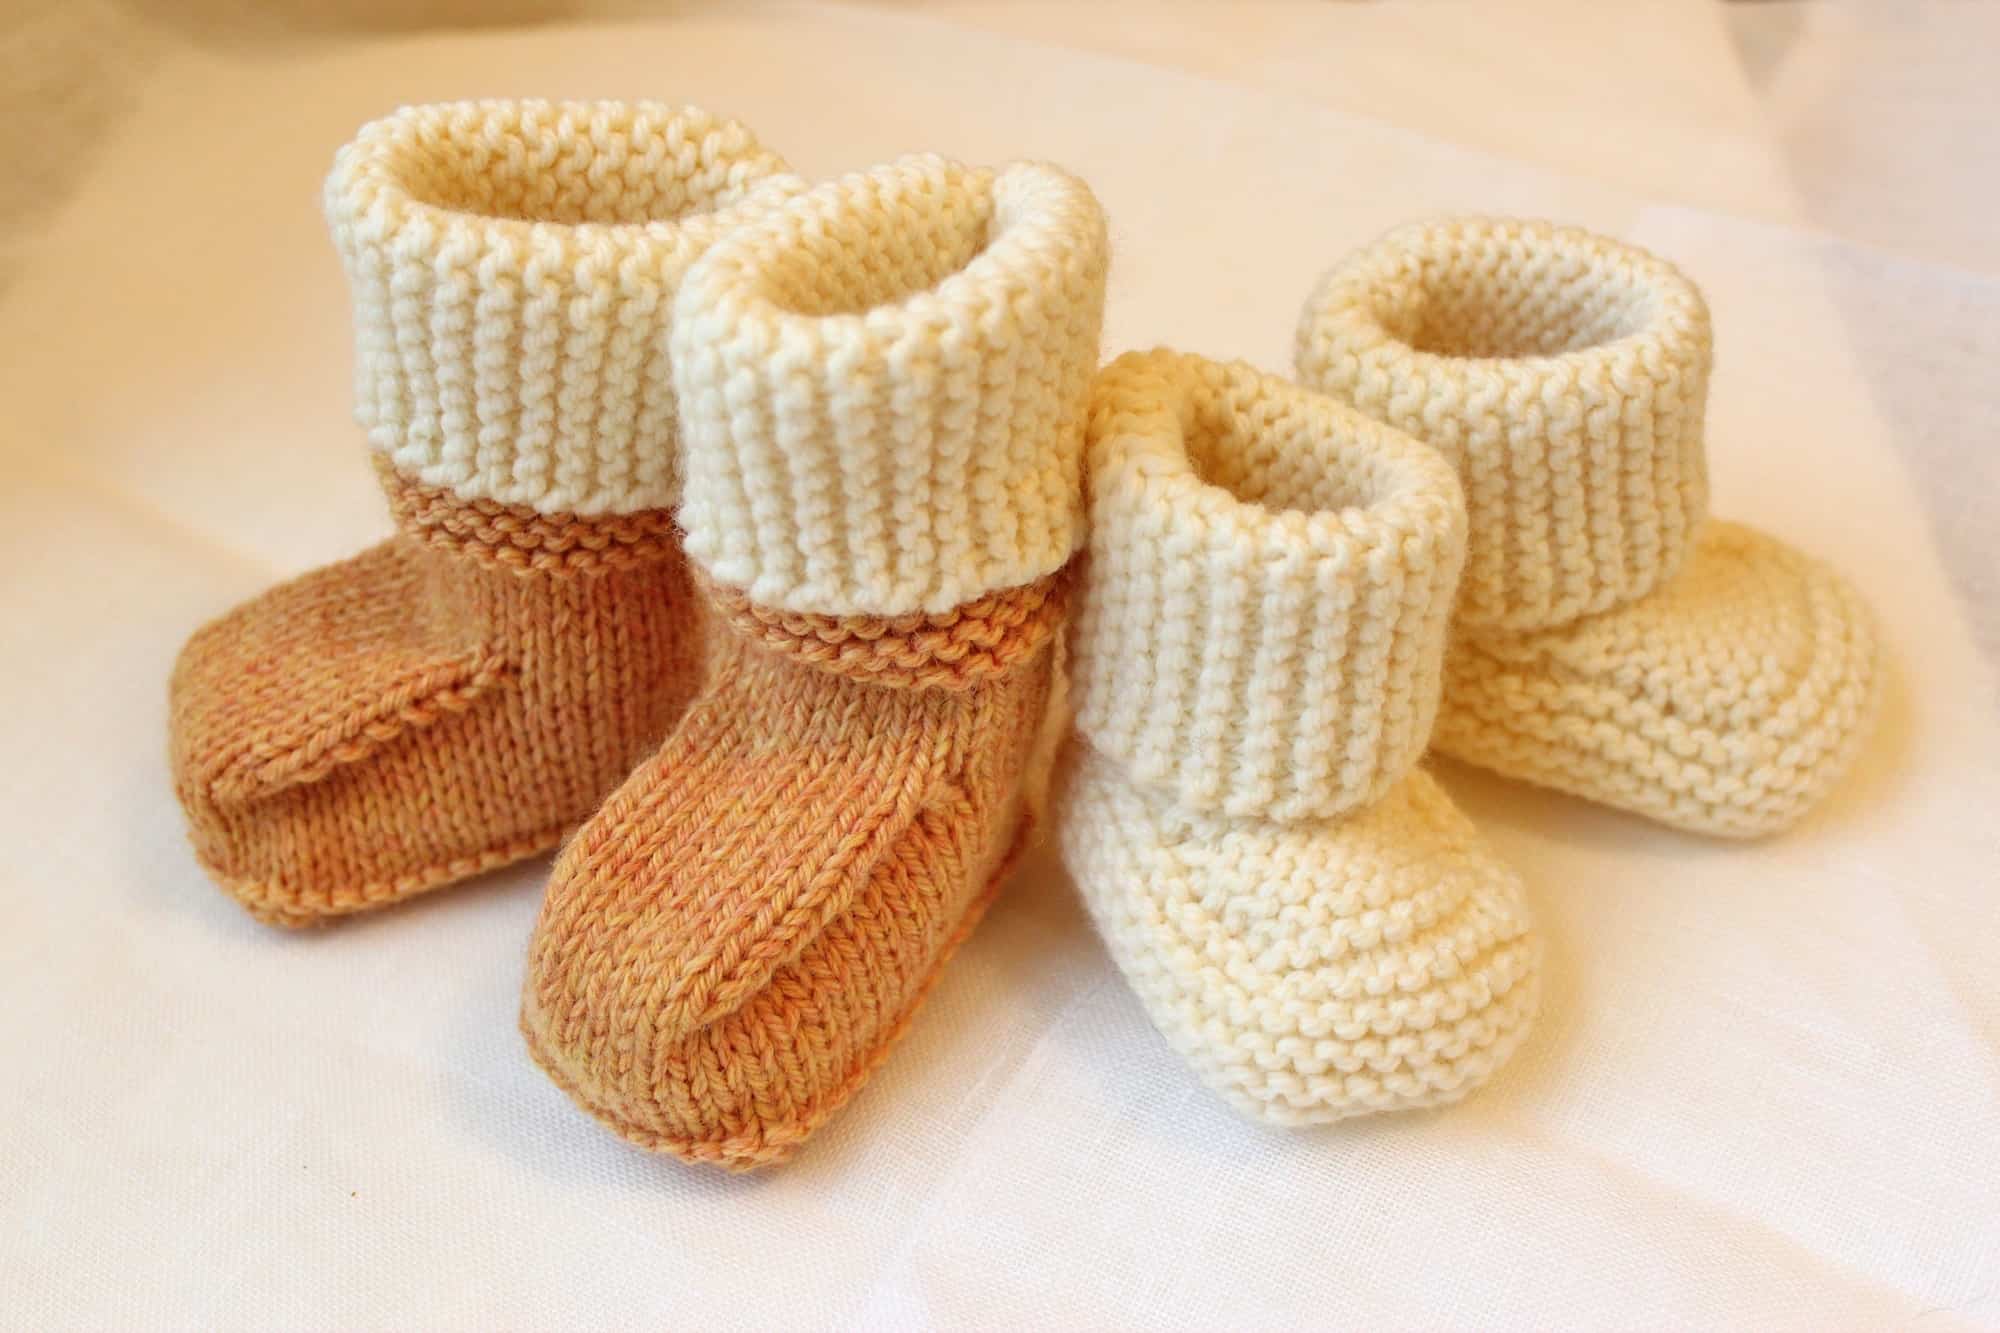 36 Casual Crochet knitting baby shoes for Girls